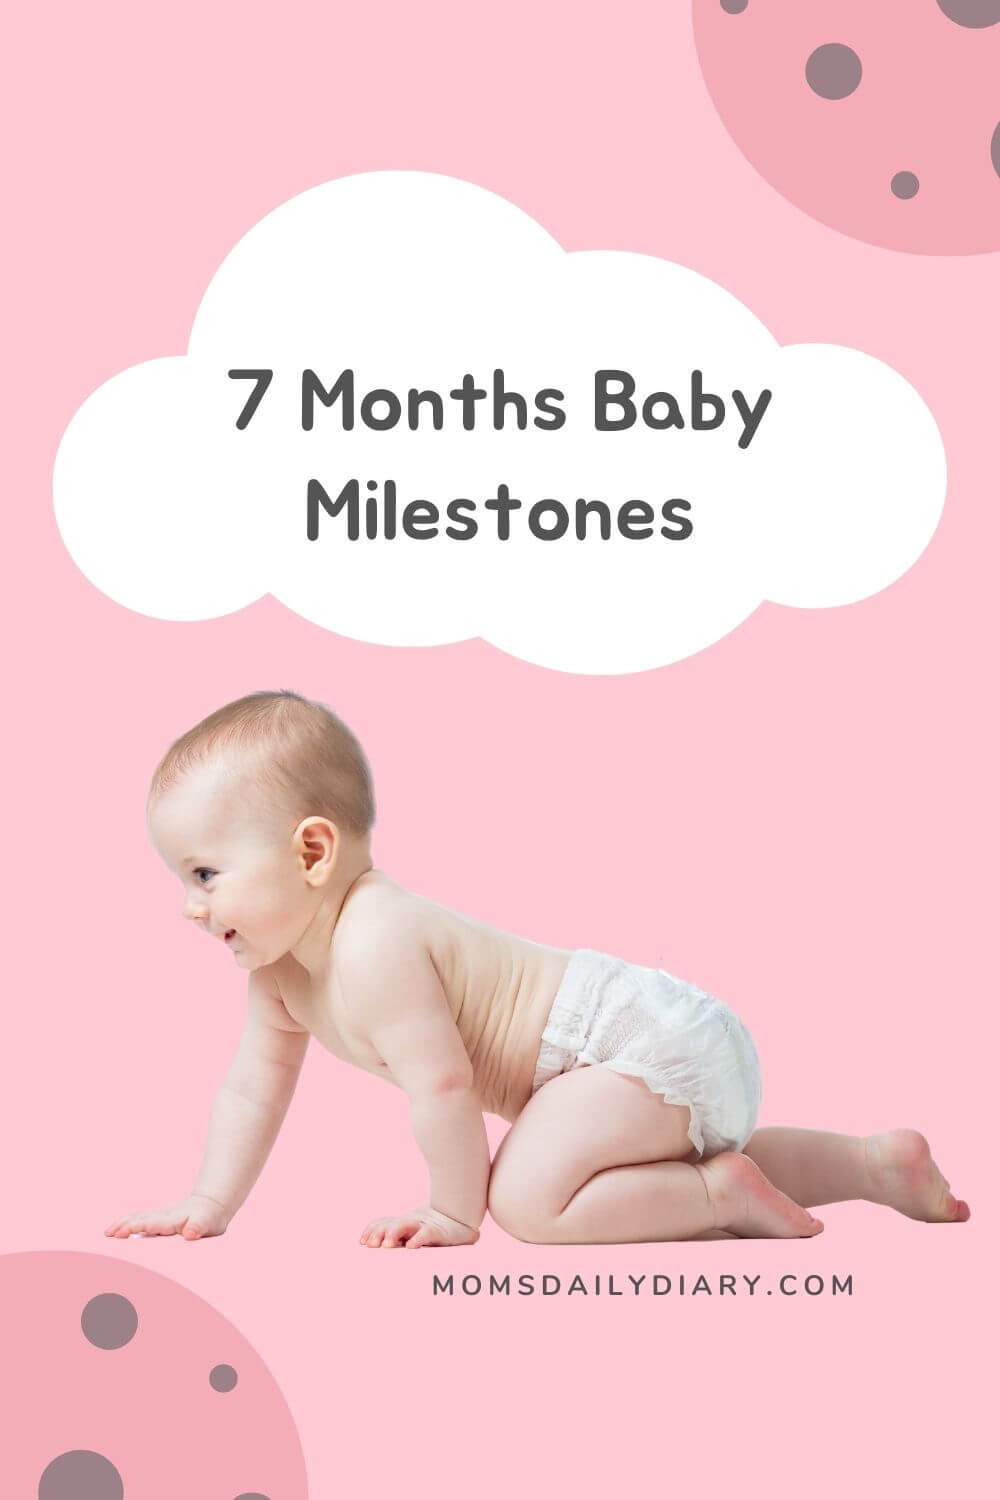 A Pinterest pin with text "7 Months Baby Milestones" and image of a crawling baby 